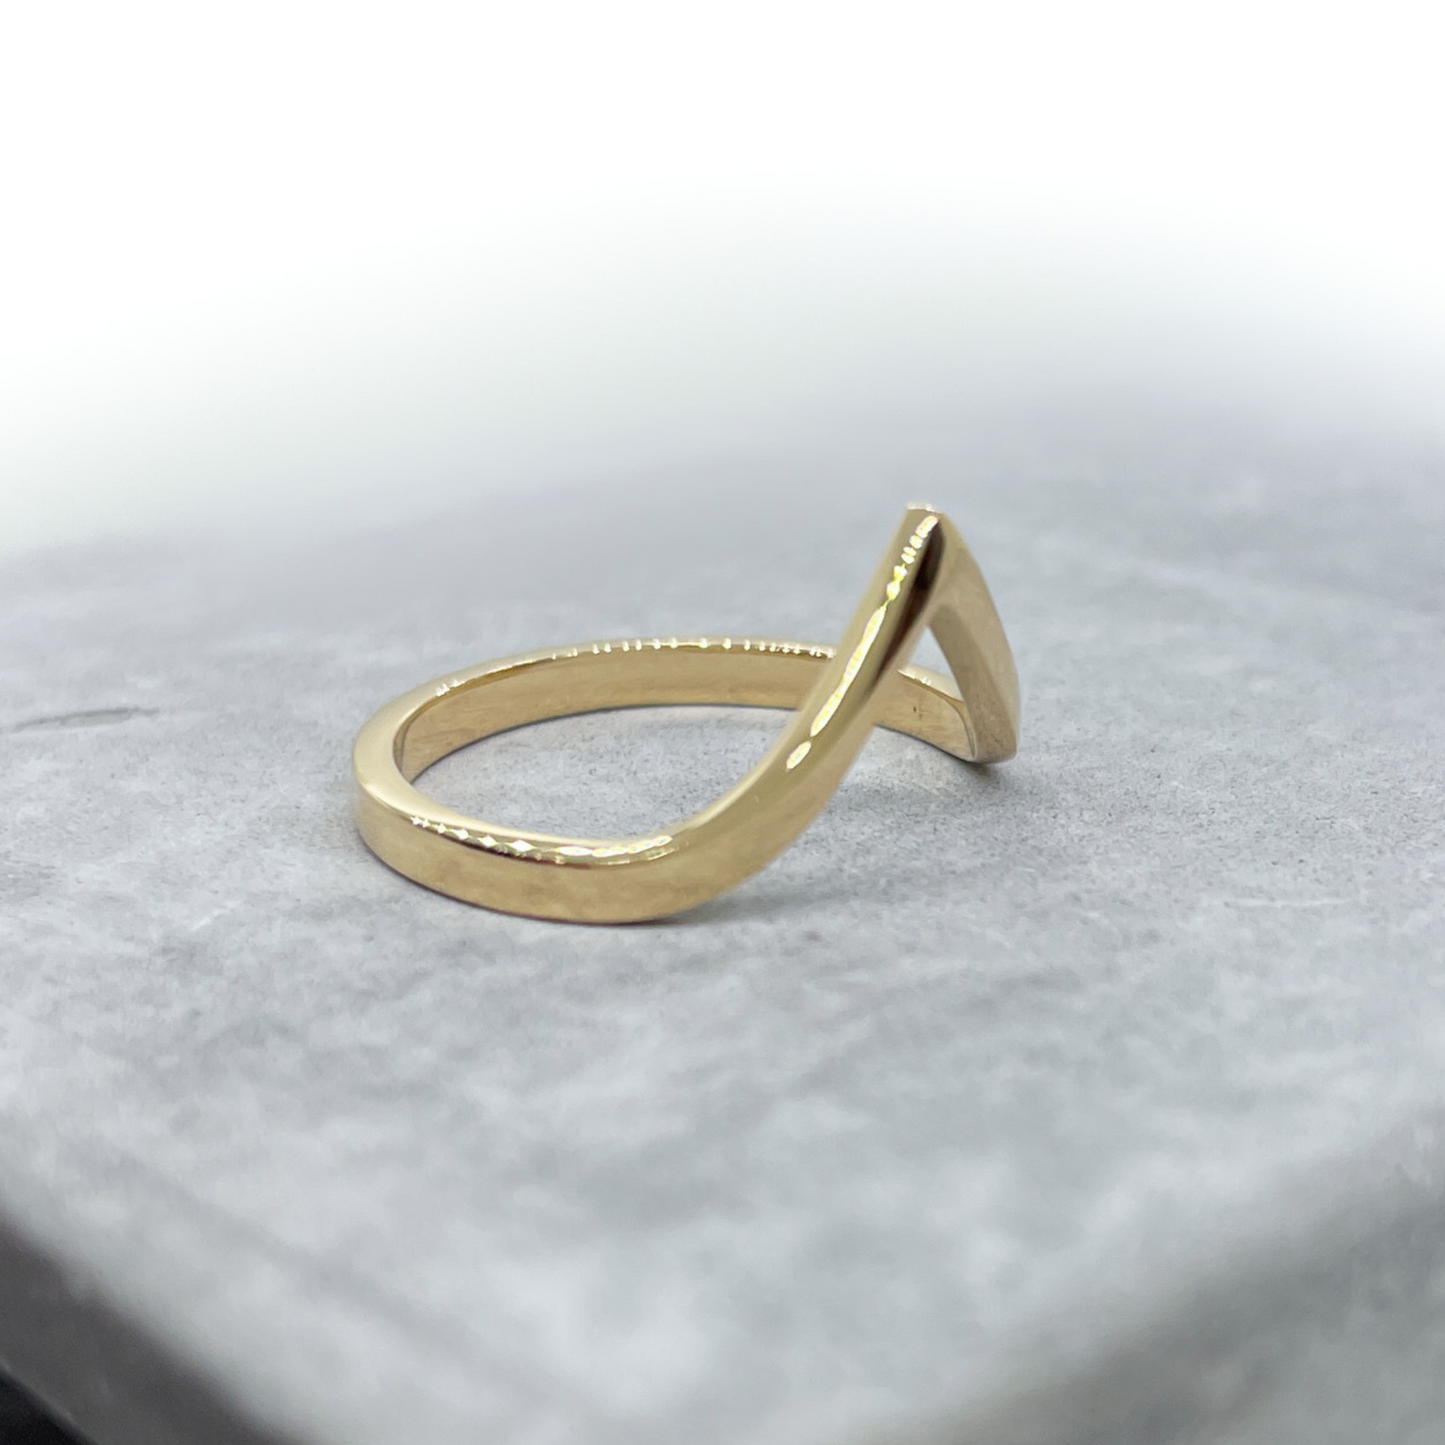 OctaHedron Jewelry Pacheco 14k Yellow Gold Nesting Contour Wedding Band Ring